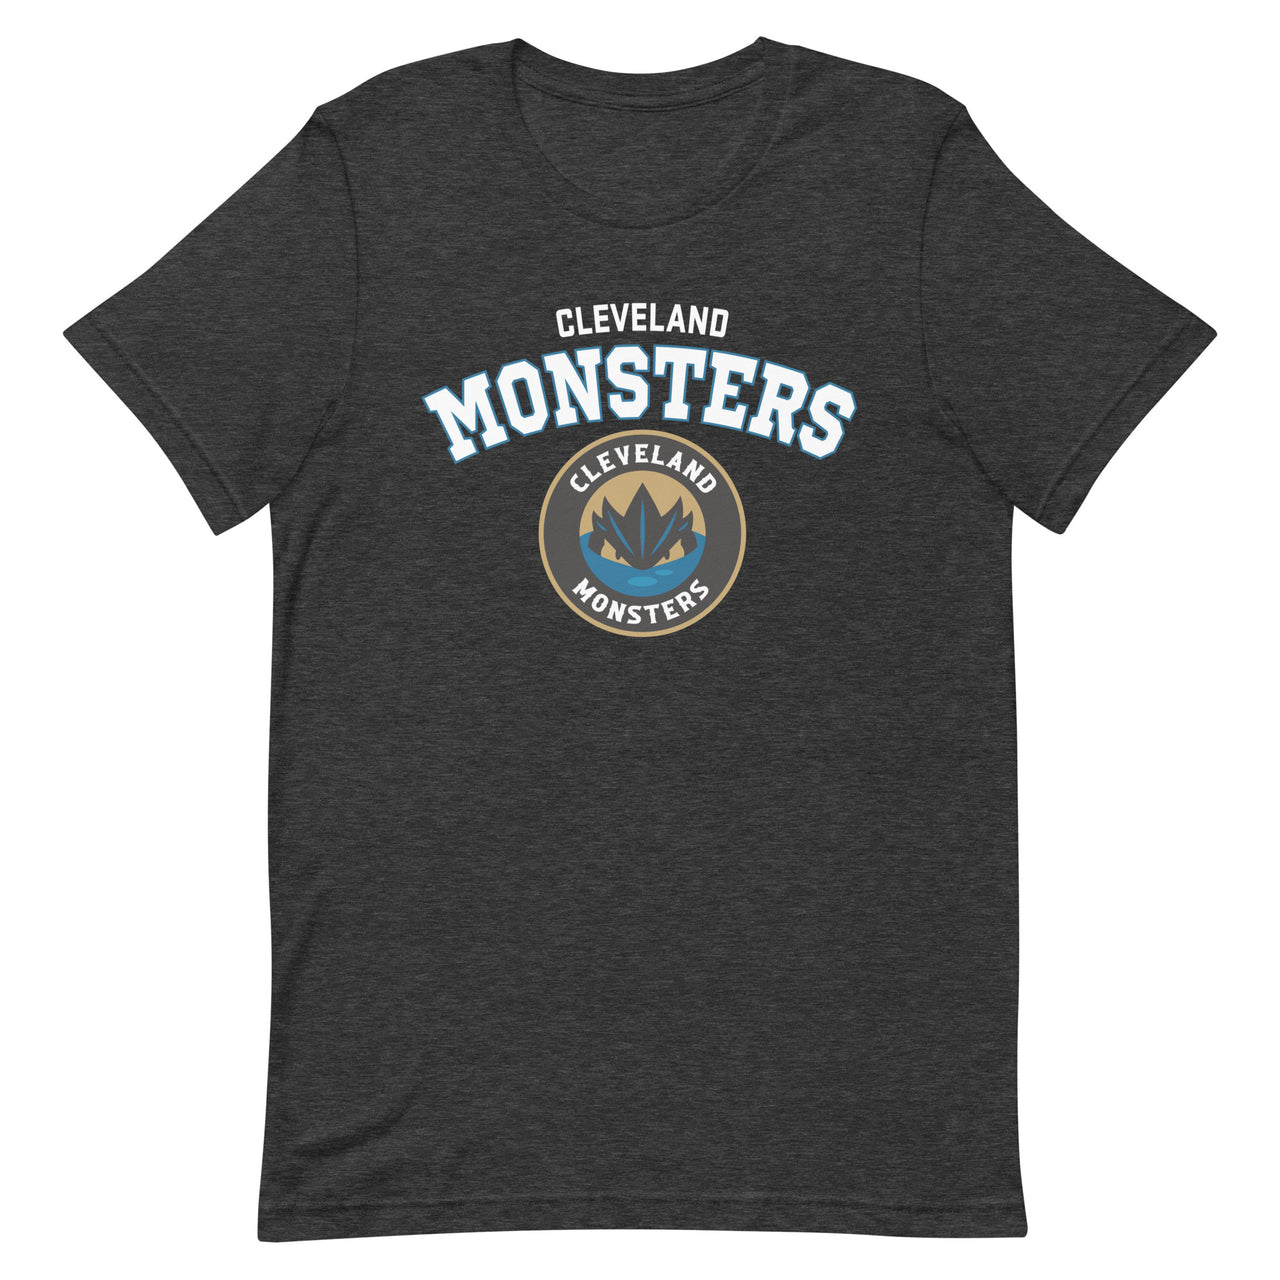 Cleveland Monsters Adult Arch Premium Short Sleeve T-shirt